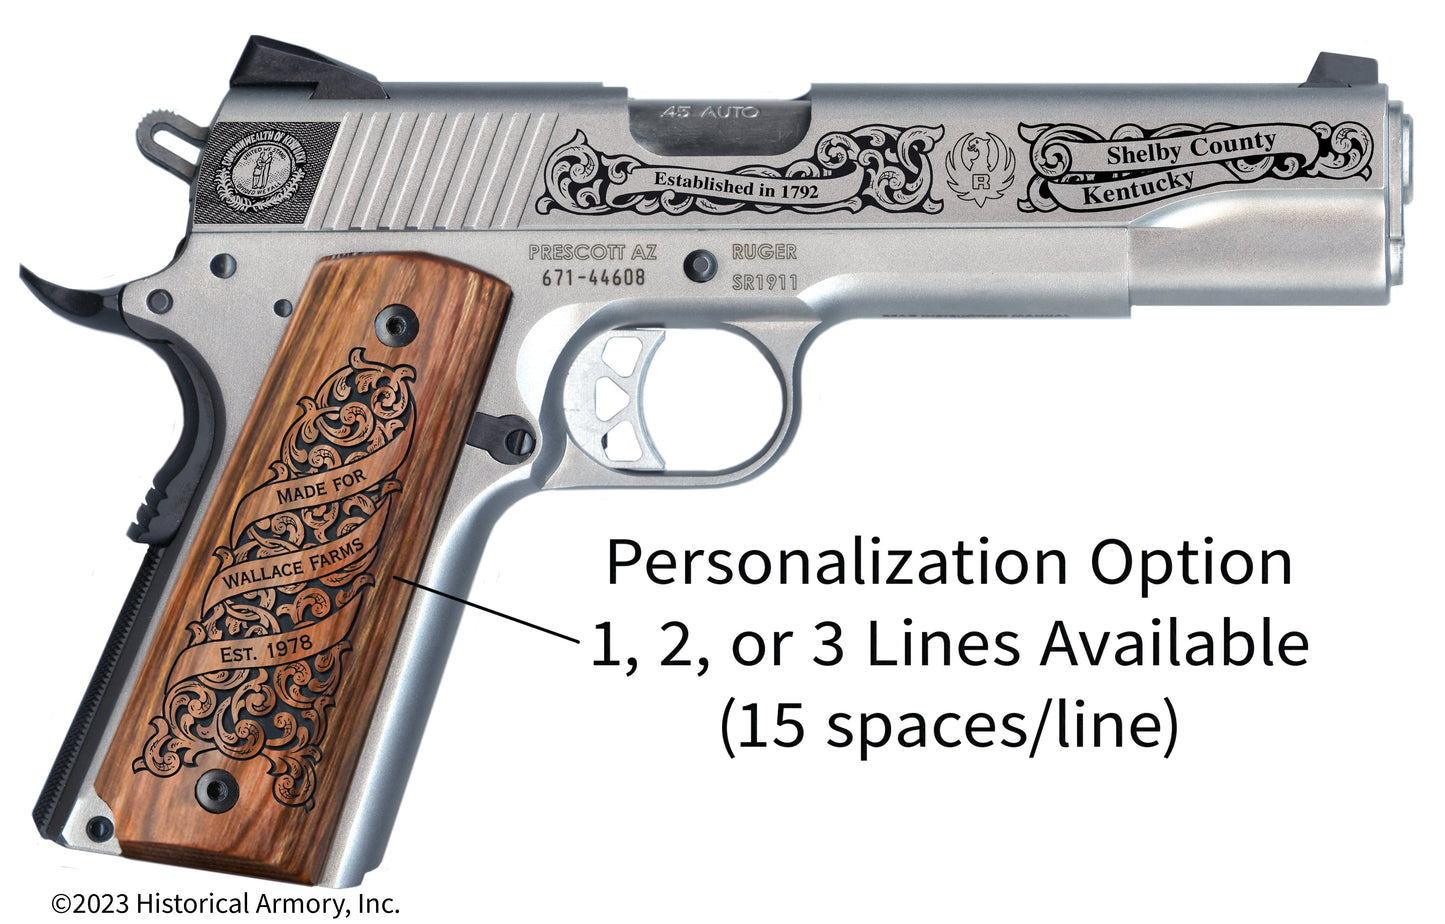 Shelby County Kentucky Personalized Engraved .45 Auto Ruger 1911